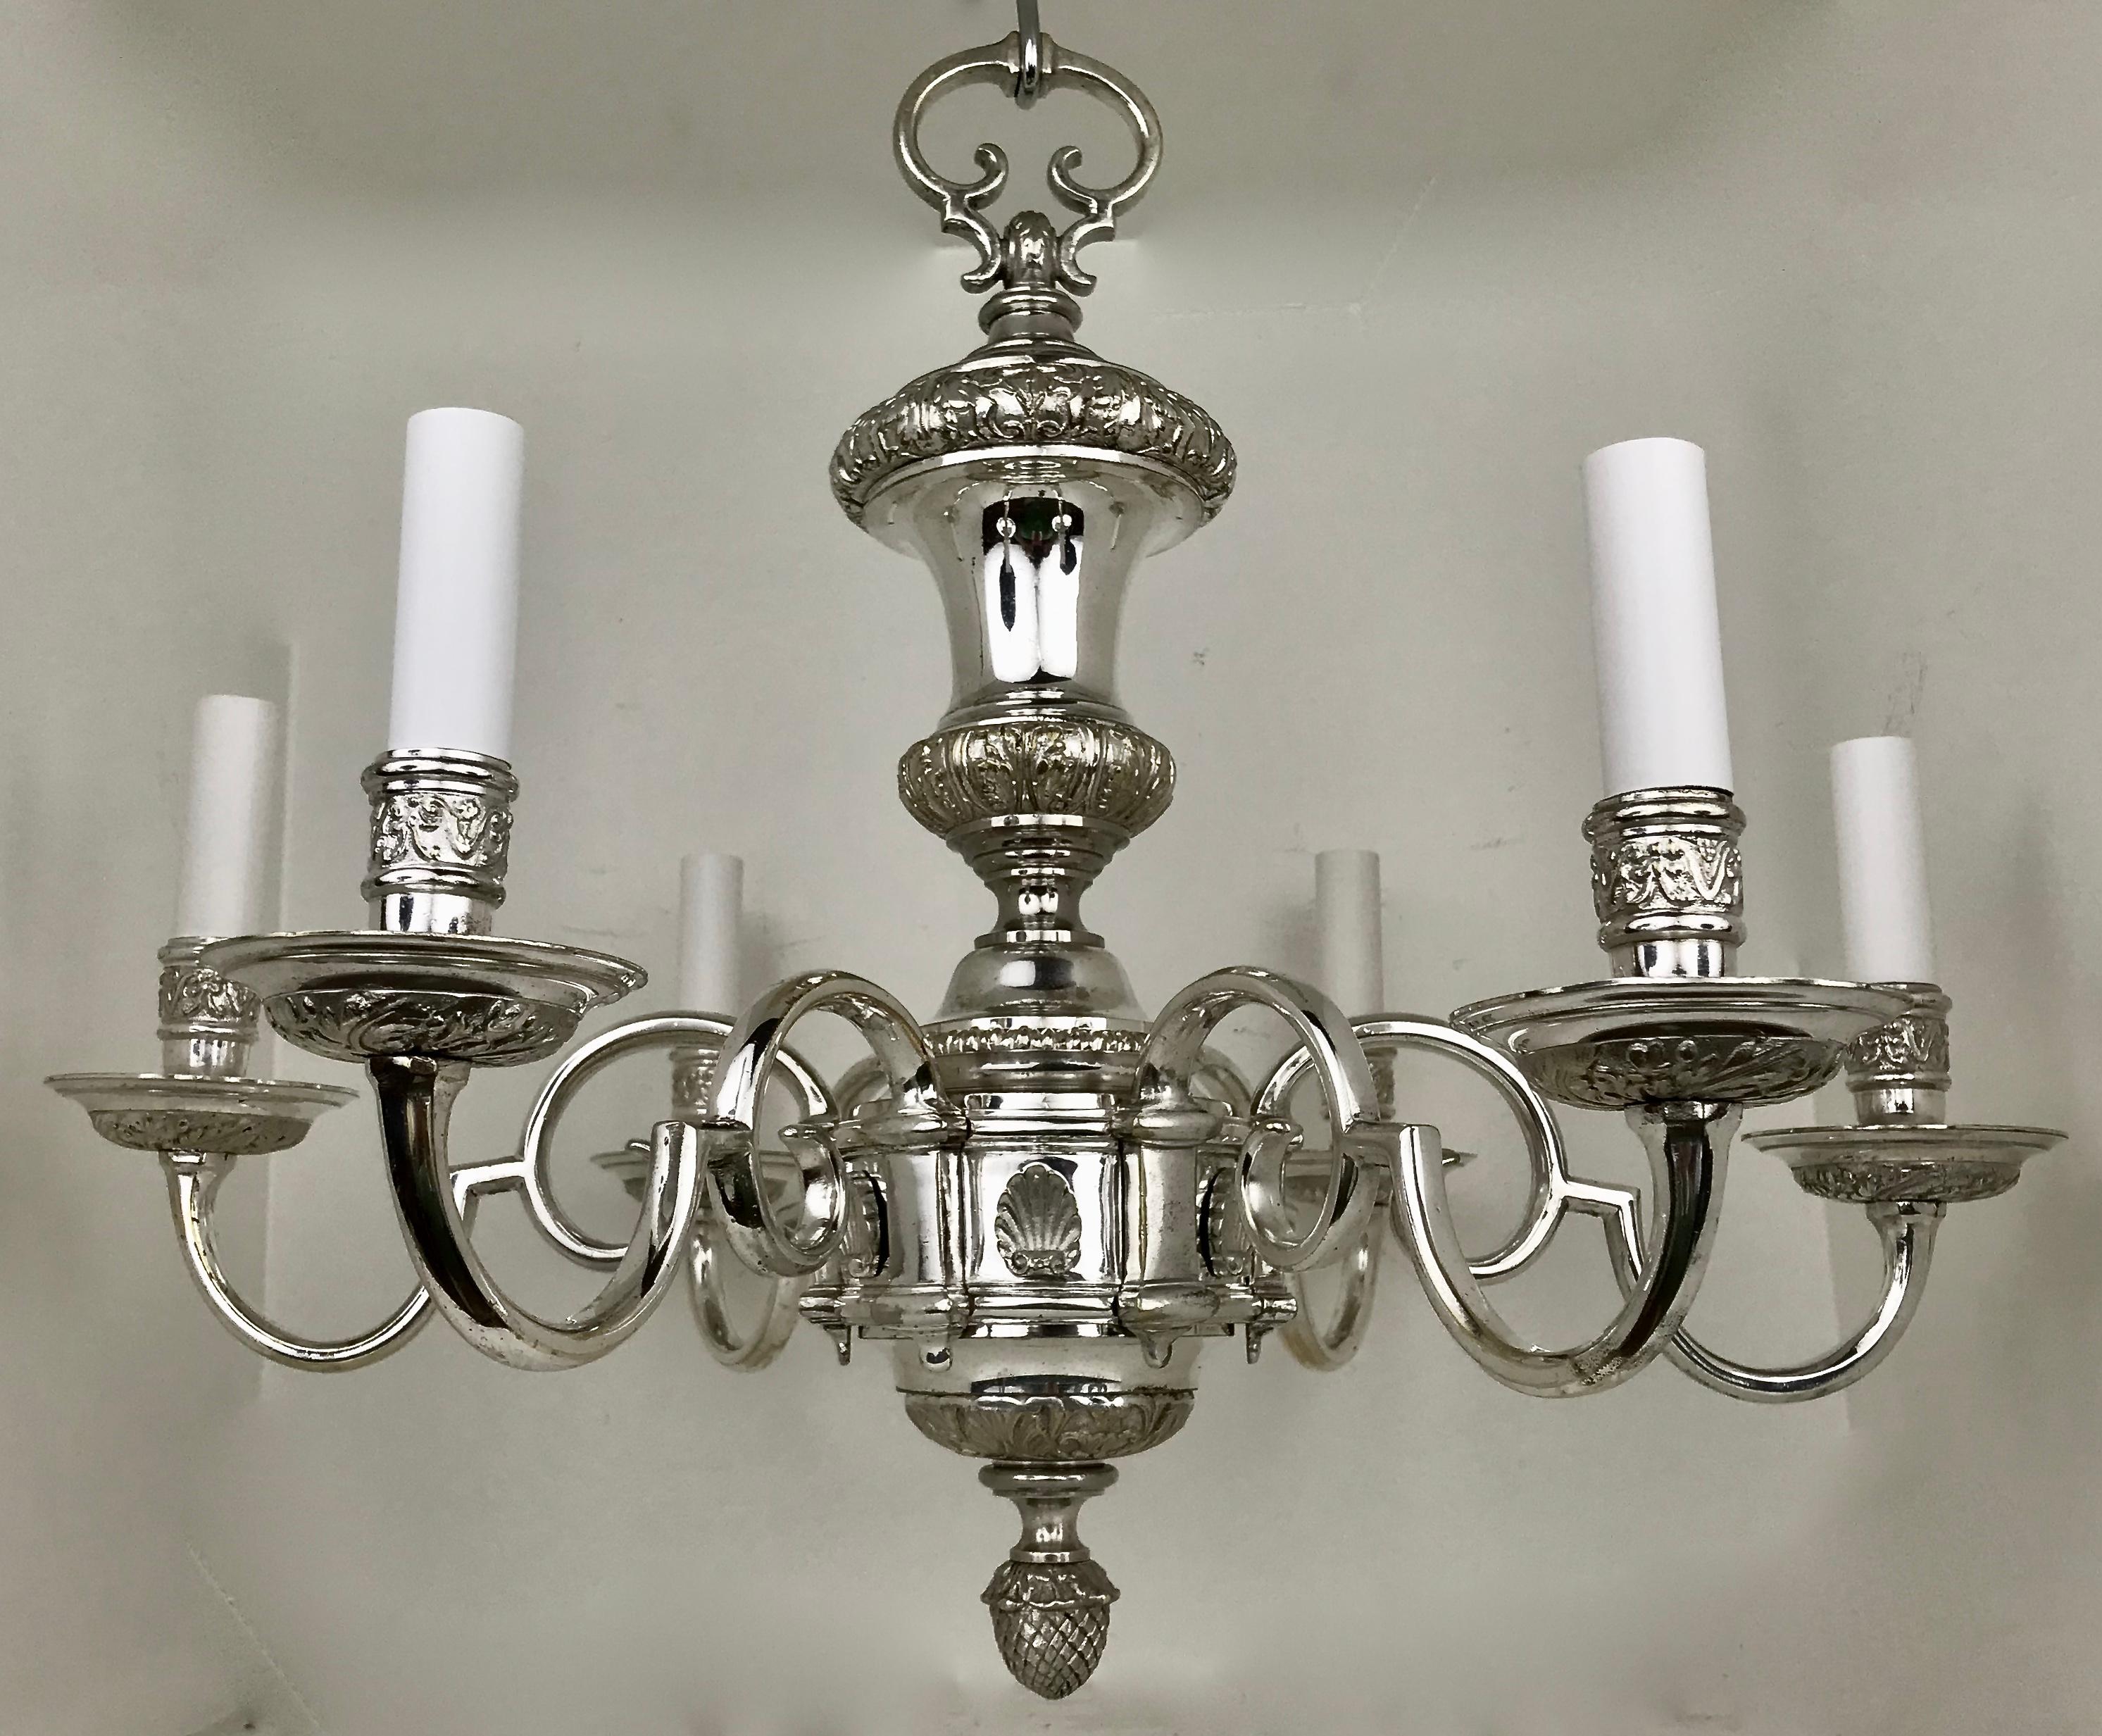 This quality six arm chandelier is beautifully cast, and features a baluster form central shaft. Adorned with scallop shells, it terminates in a pinecone finial.
